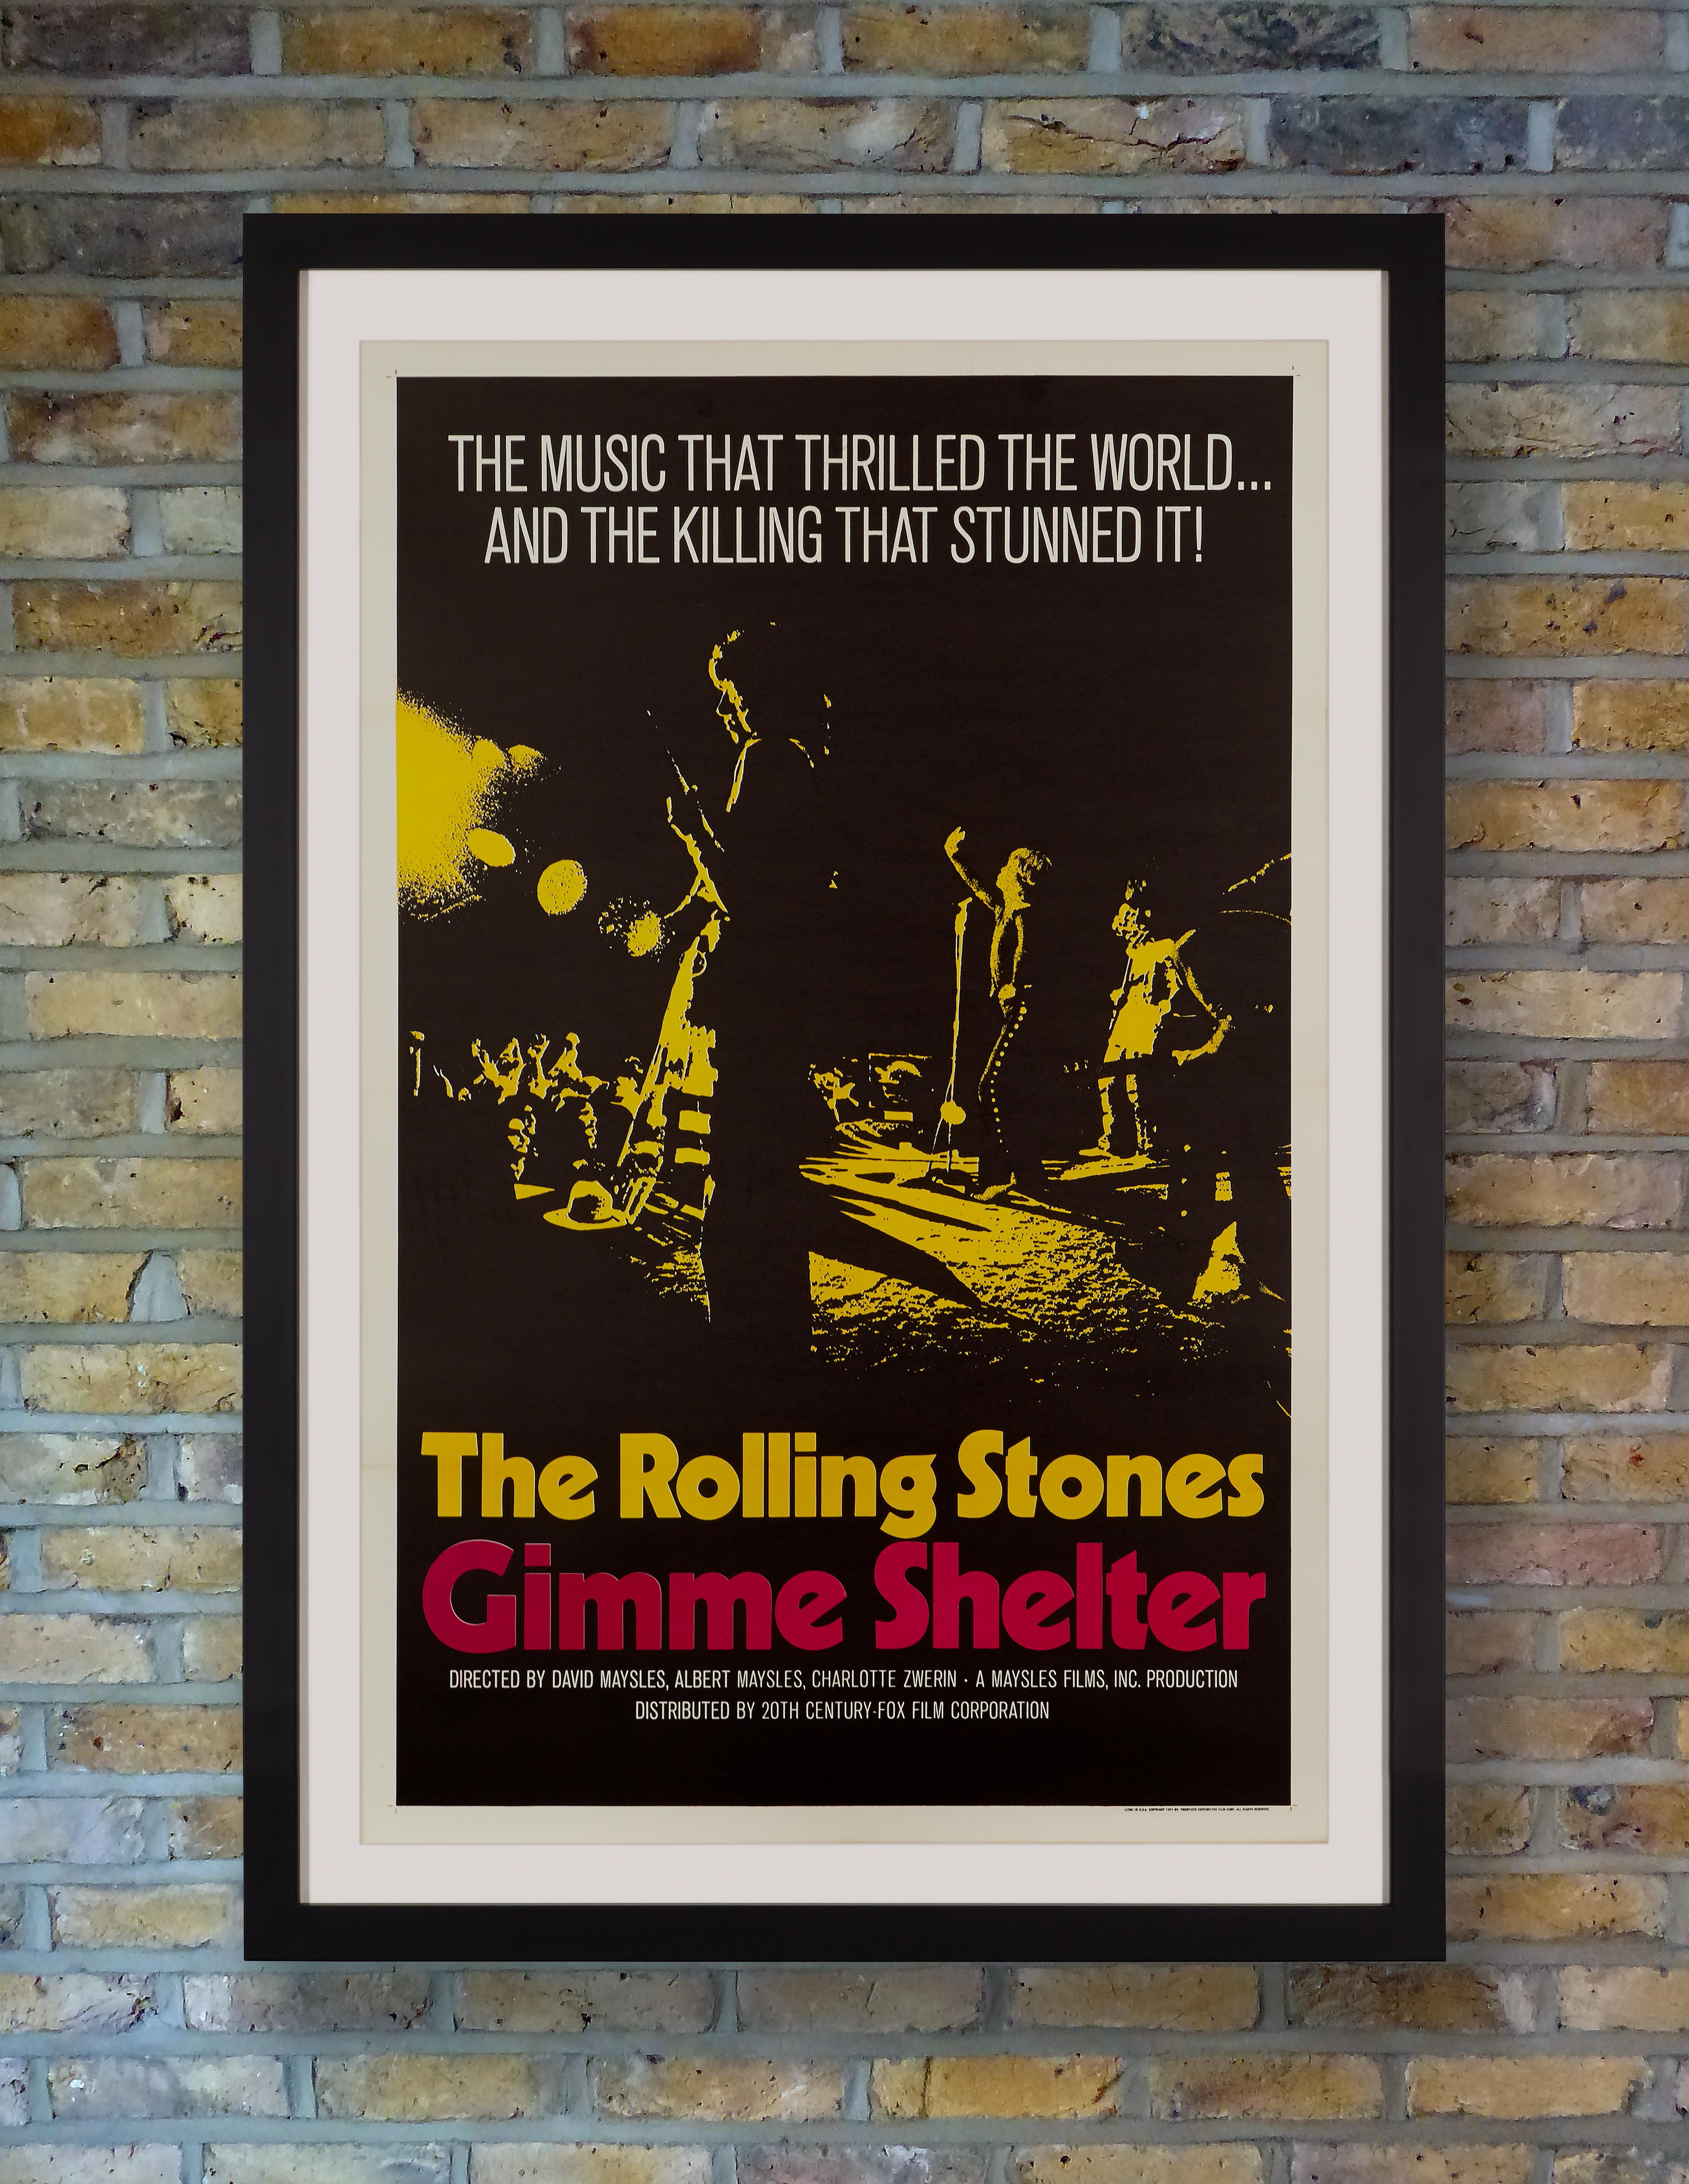 Often hailed as one of the greatest rock films ever made, the Maysles brothers 1970 documentary 'Gimme Shelter' followed the last few weeks of The Rolling Stones 1969 US Tour, culminating in the fateful events at the notorious Altamont free concert